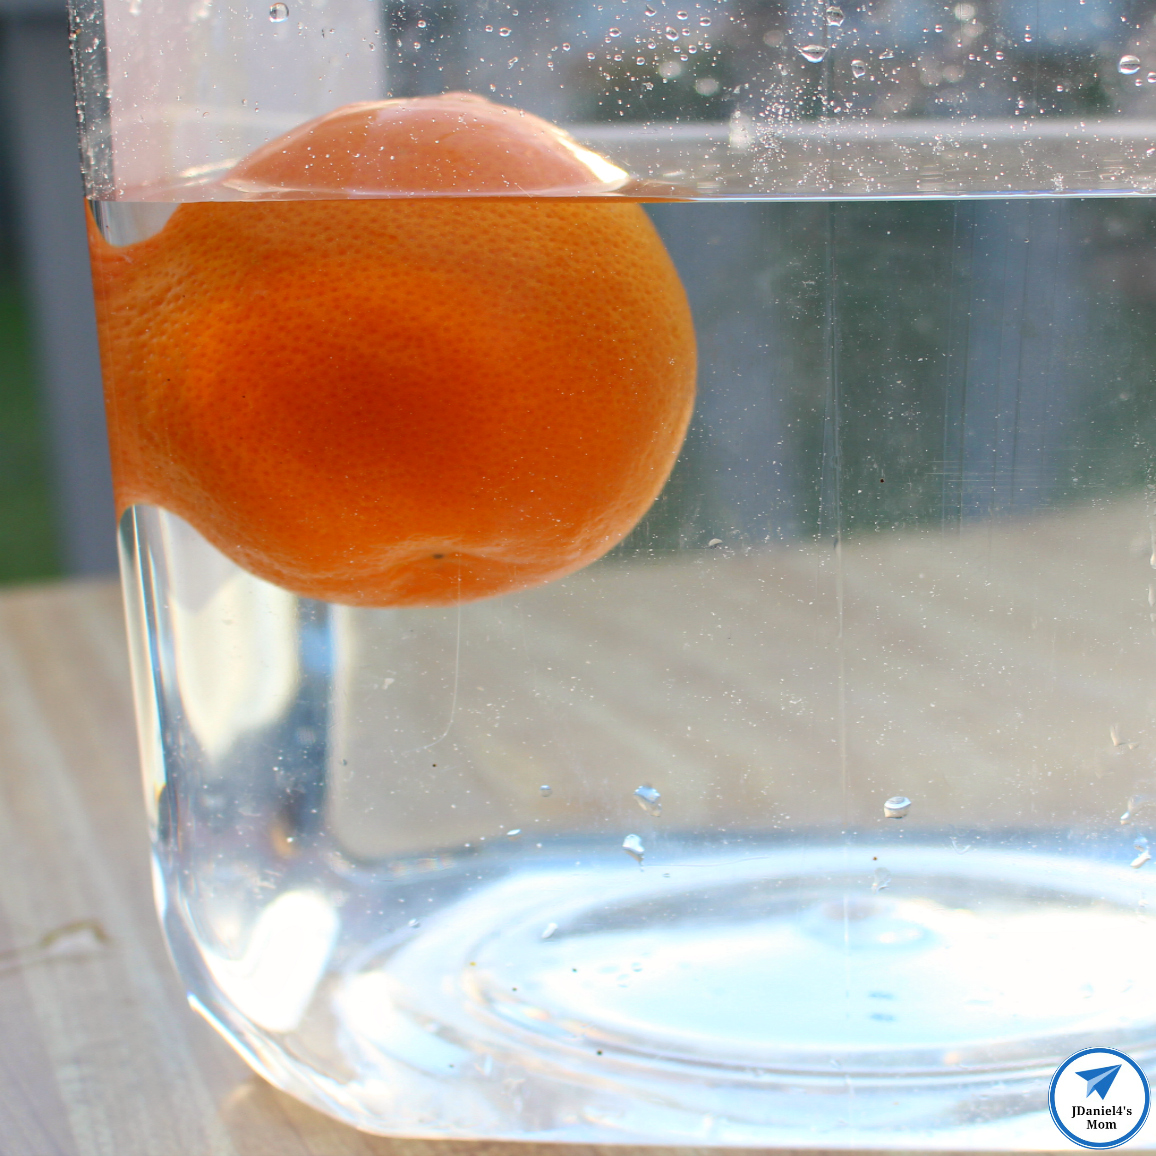 Exploring the Density of Orange Parts Using the Scientific Method Experiment and Free Experiment - Floating Orange